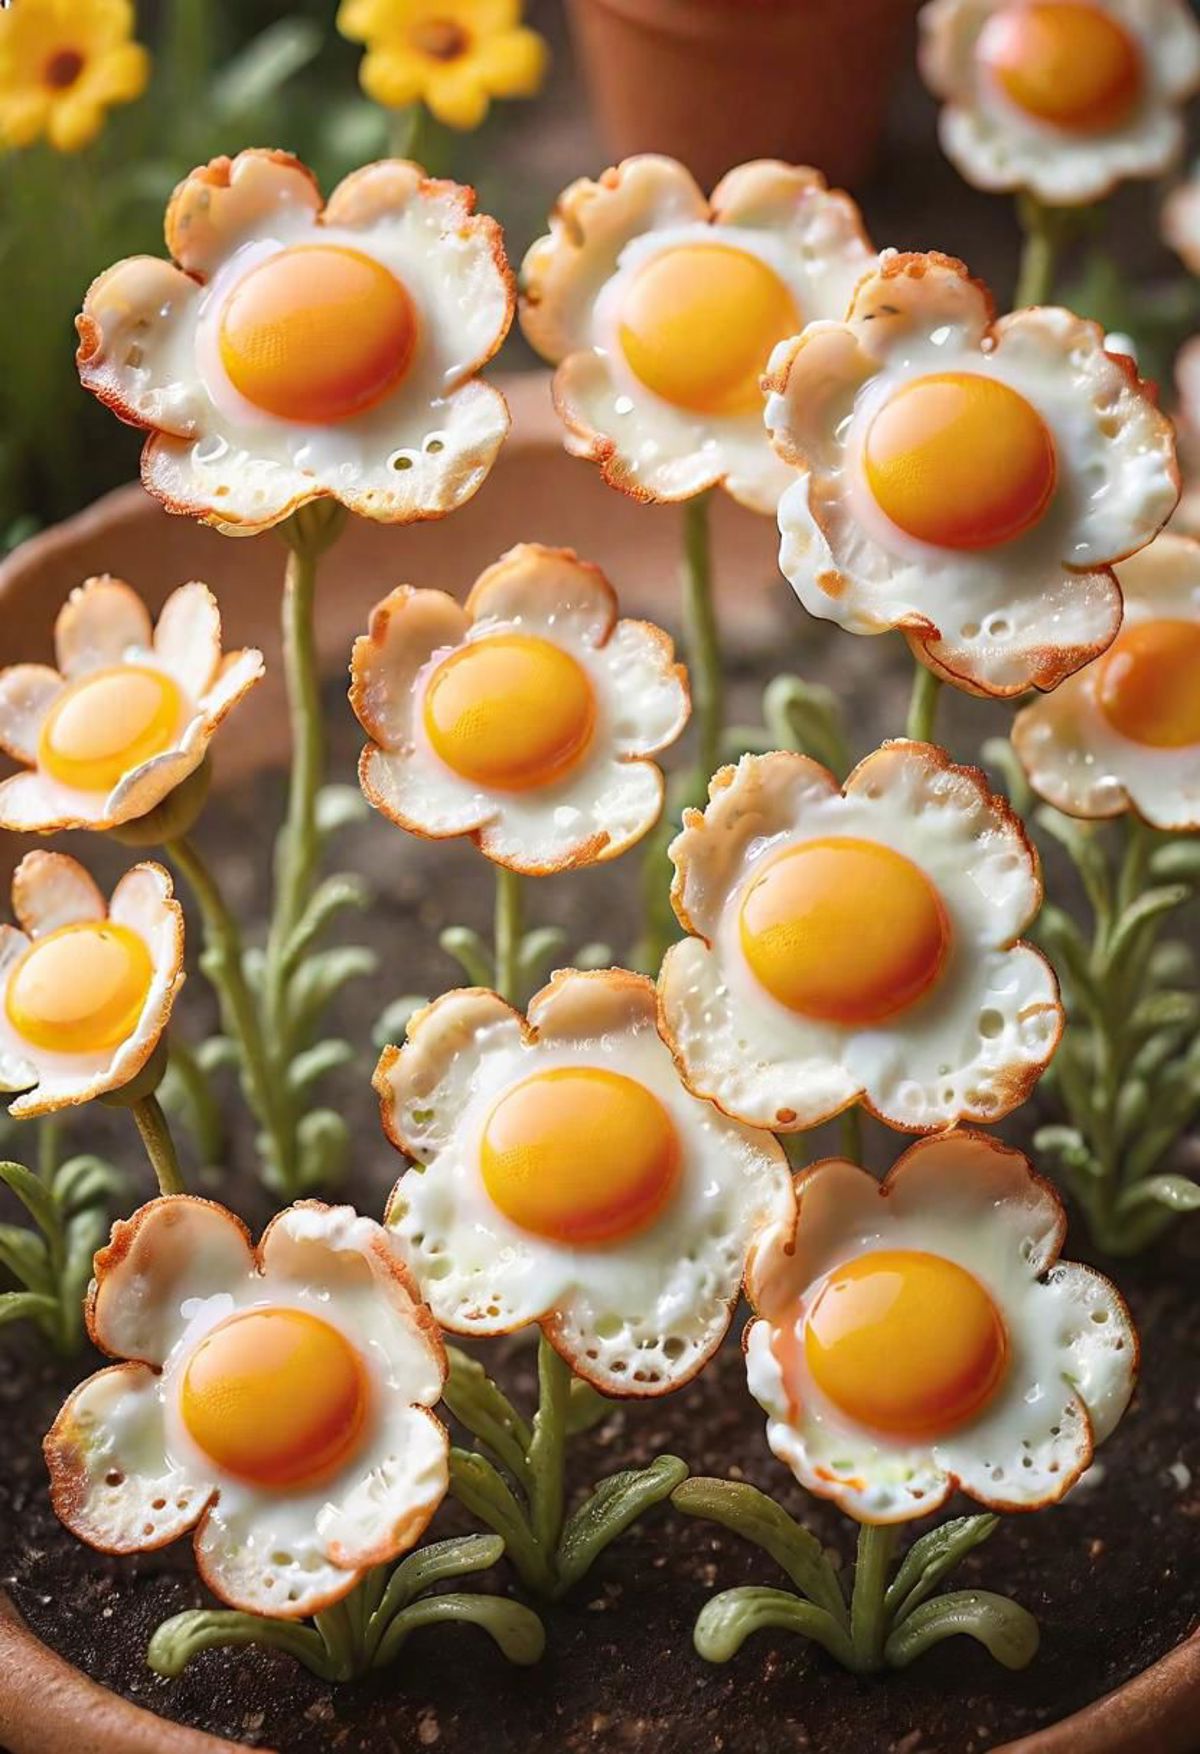 A group of hard boiled eggs artfully arranged to look like flowers, displayed in a bowl.